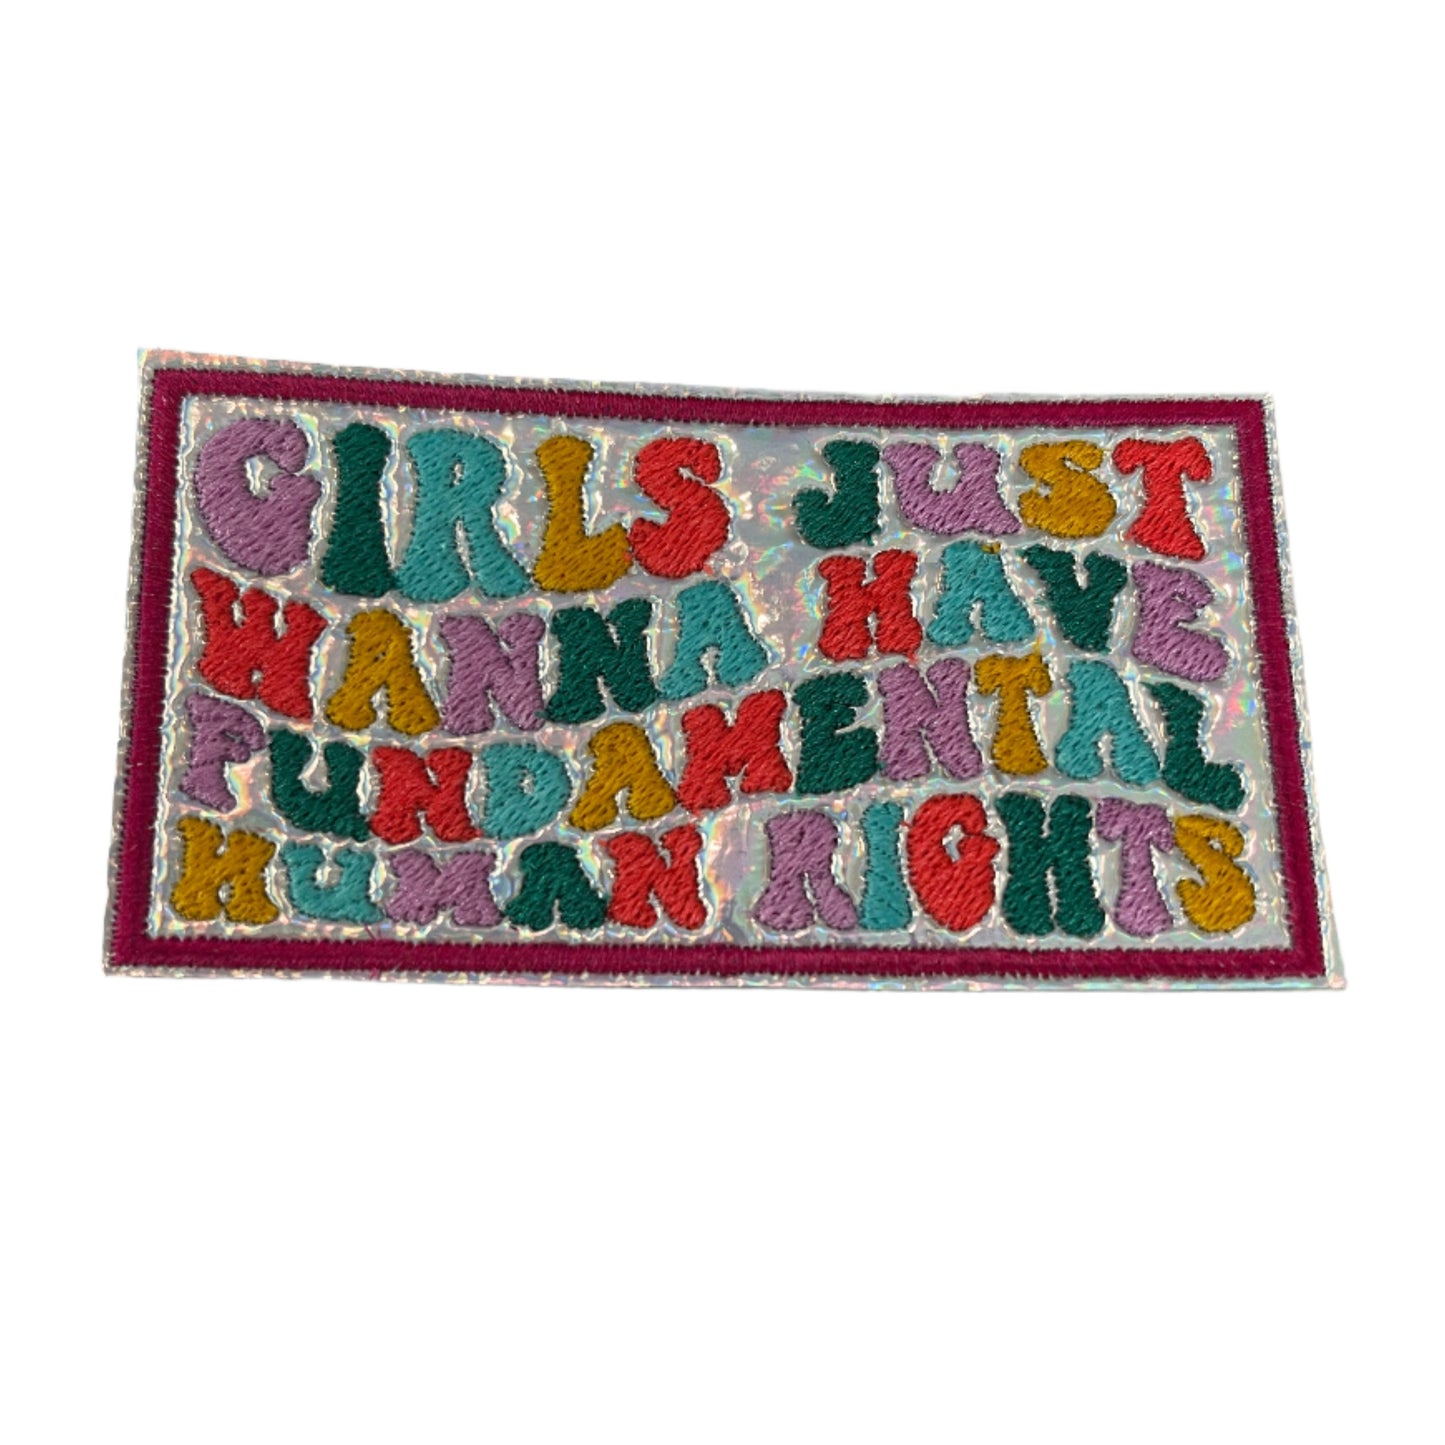 Handmade Girls Just Wanna Have Fundamental Human Rights Iron-On Patch | Multicolor Text, Holographic Background